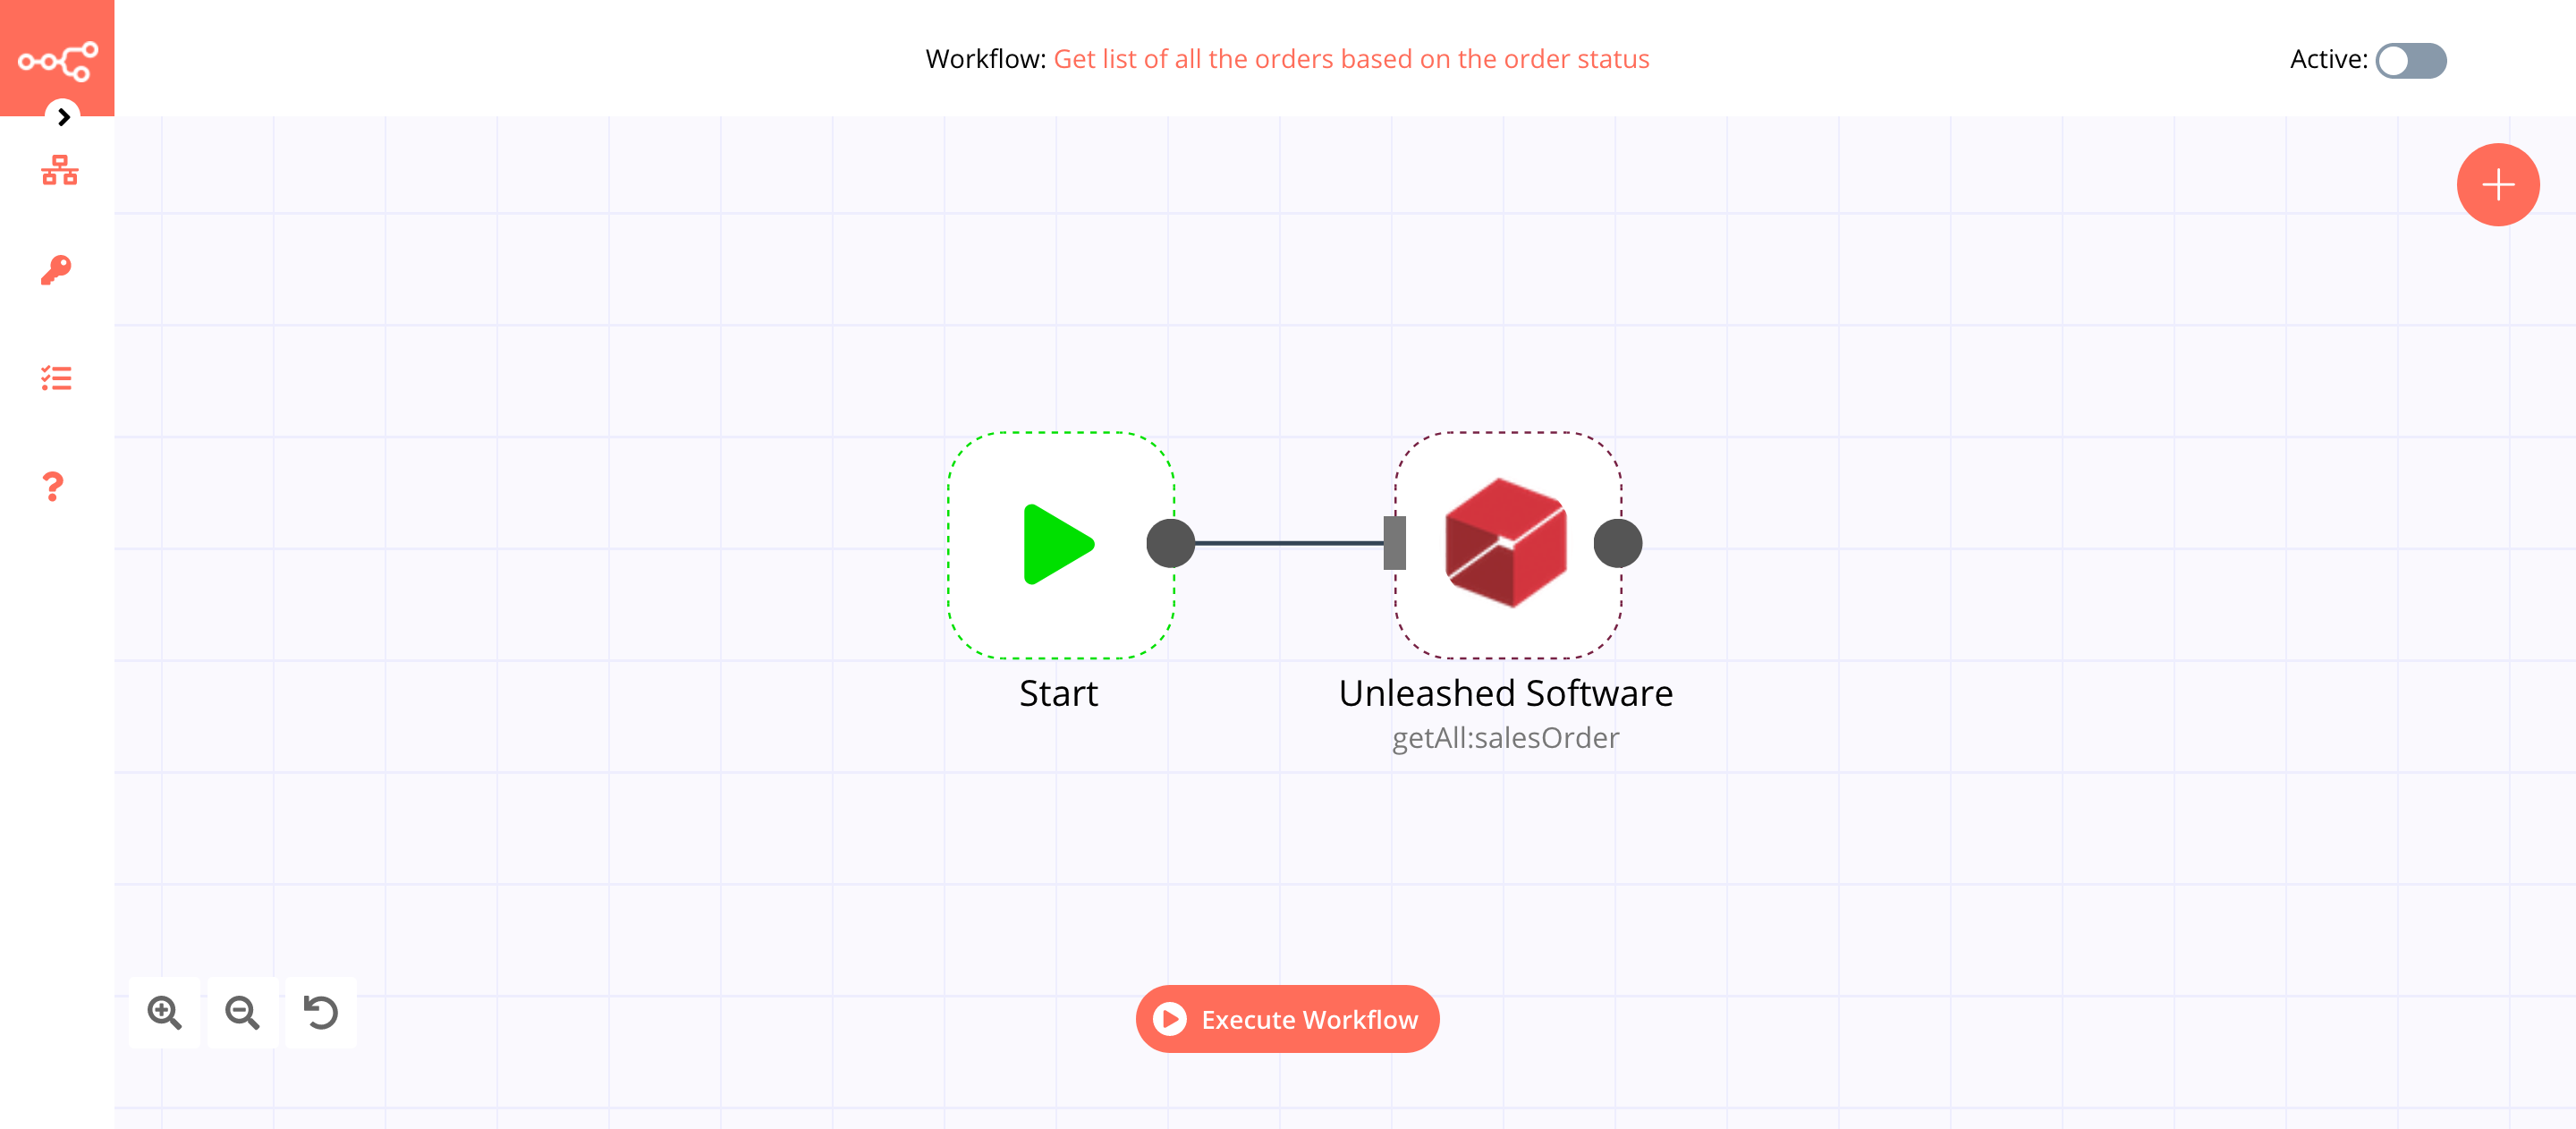 A workflow with the Unleashed Software node